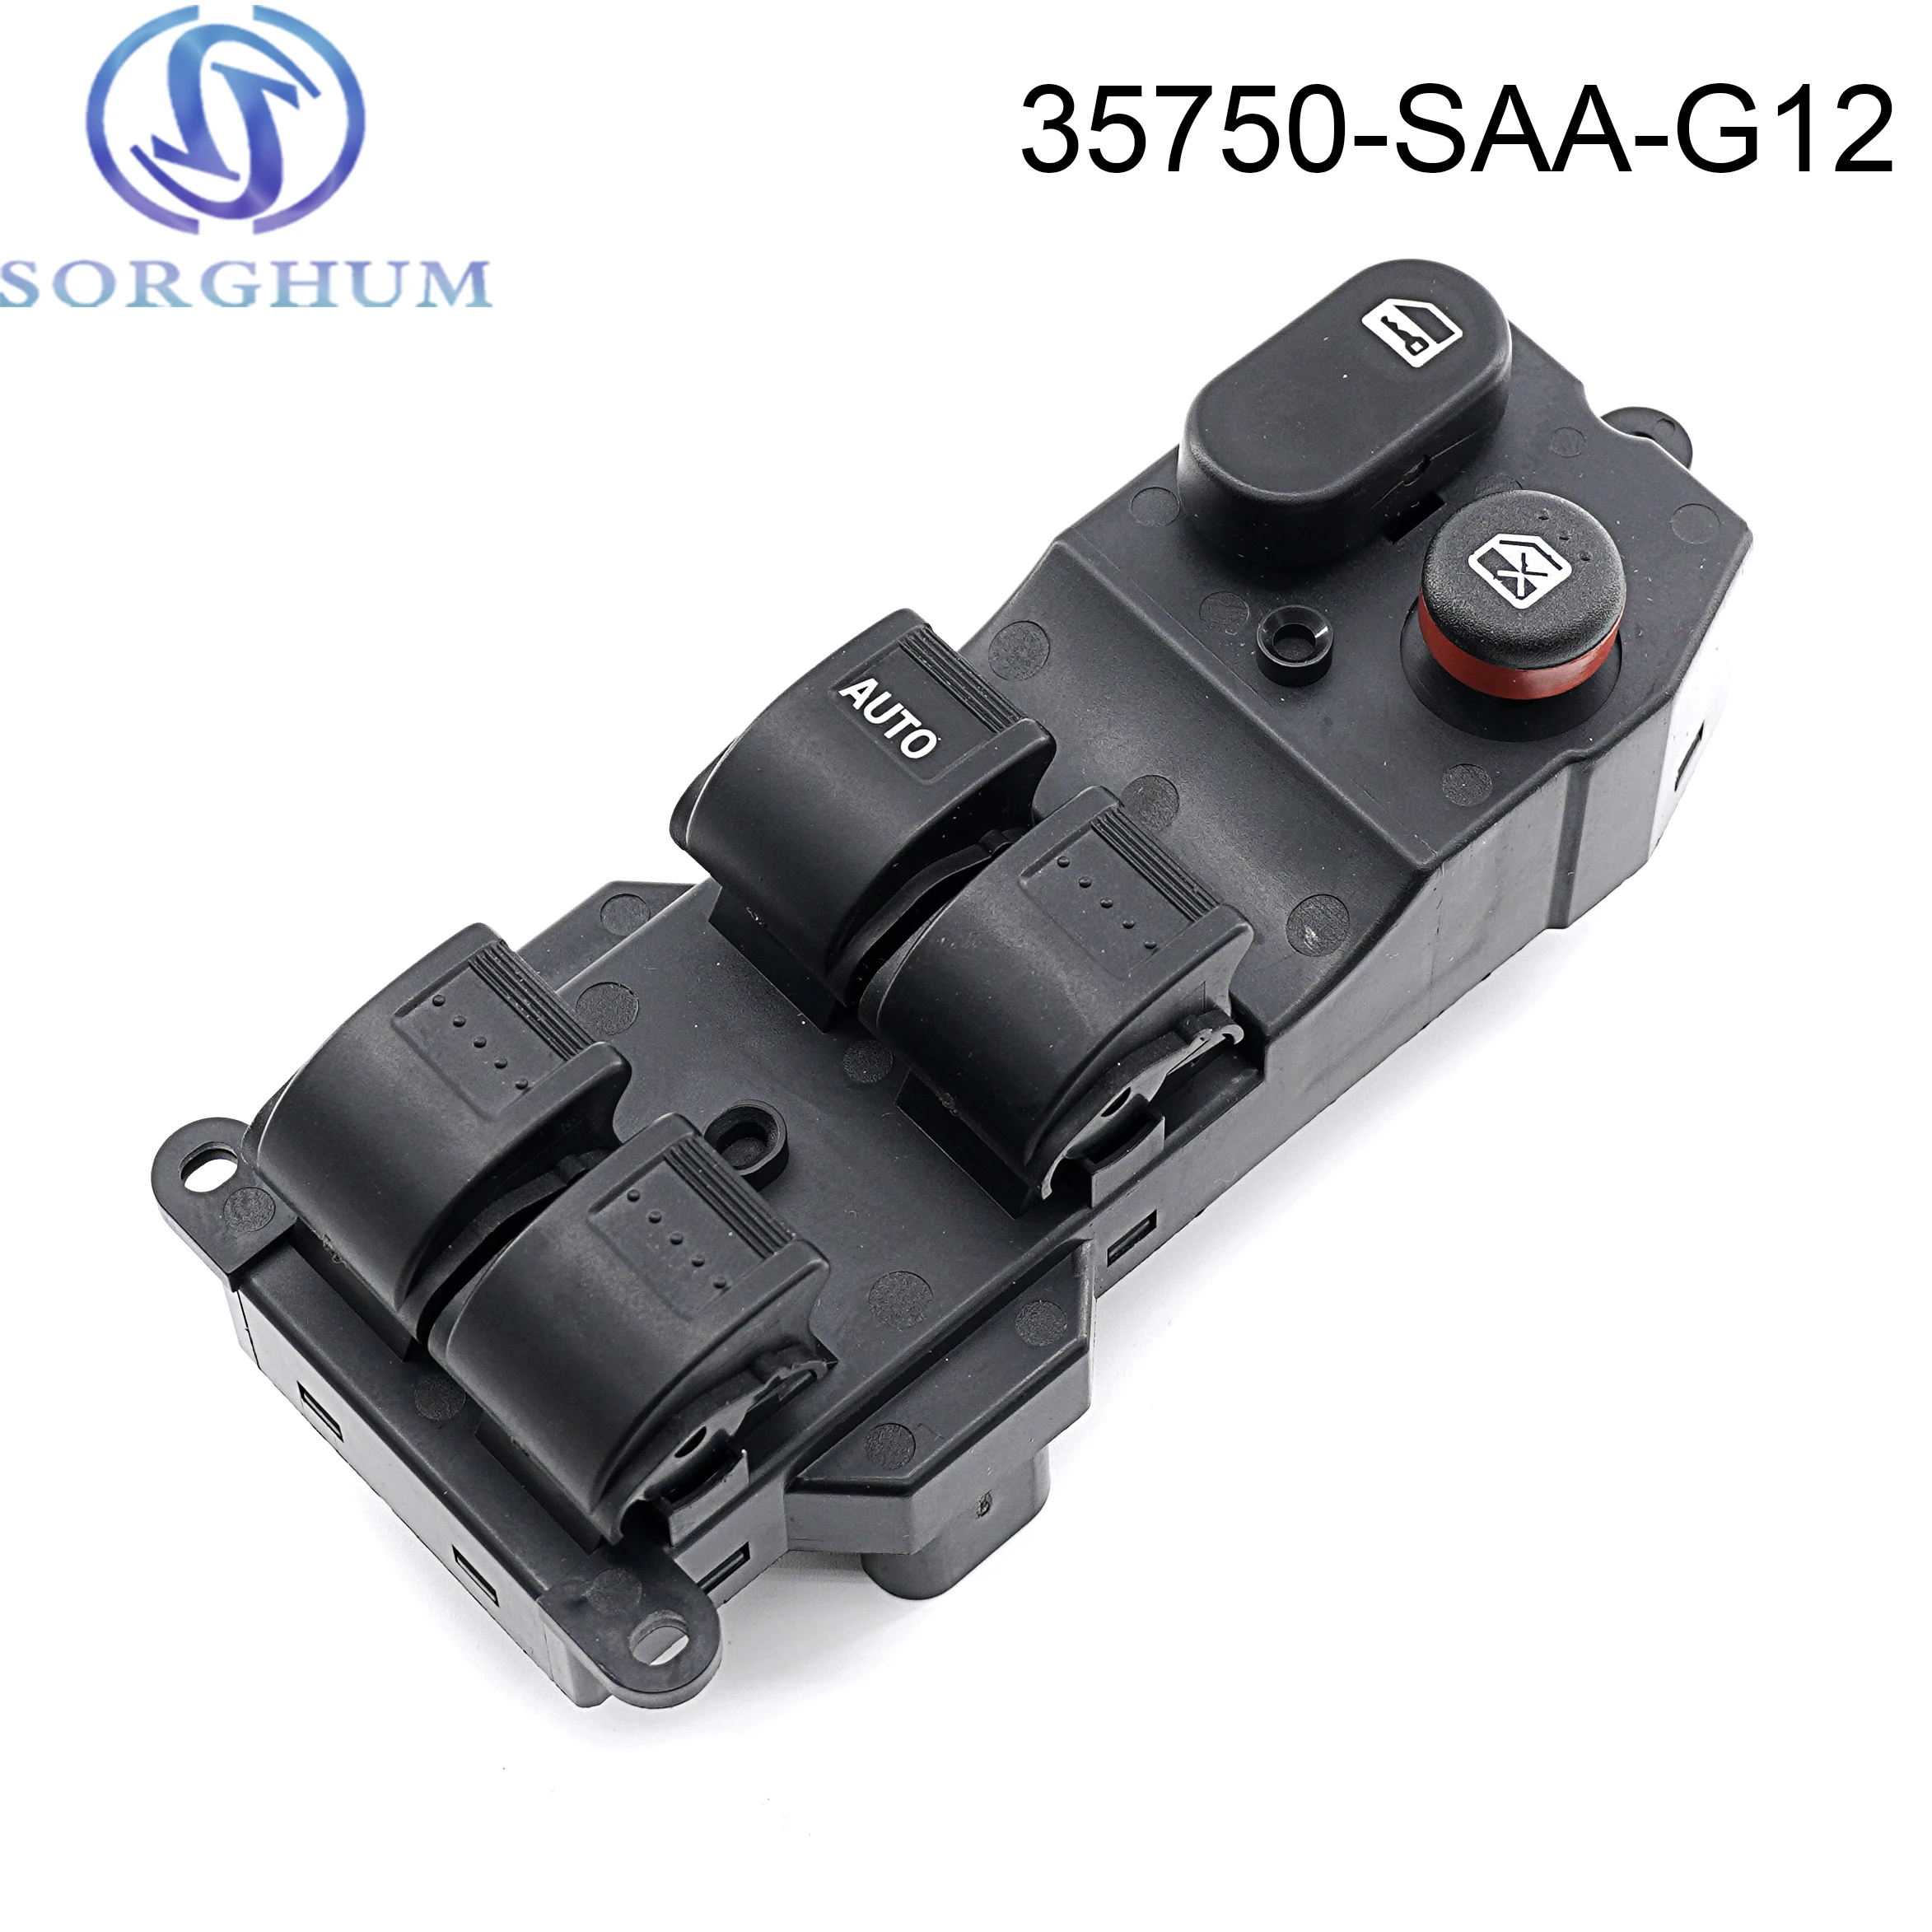 

Sorghum 35750-SAA-G12 35750-SEL-P02 LHD Master Electric Power Window Control Switch For Honda Honda City Fit Jazz 2003-2008